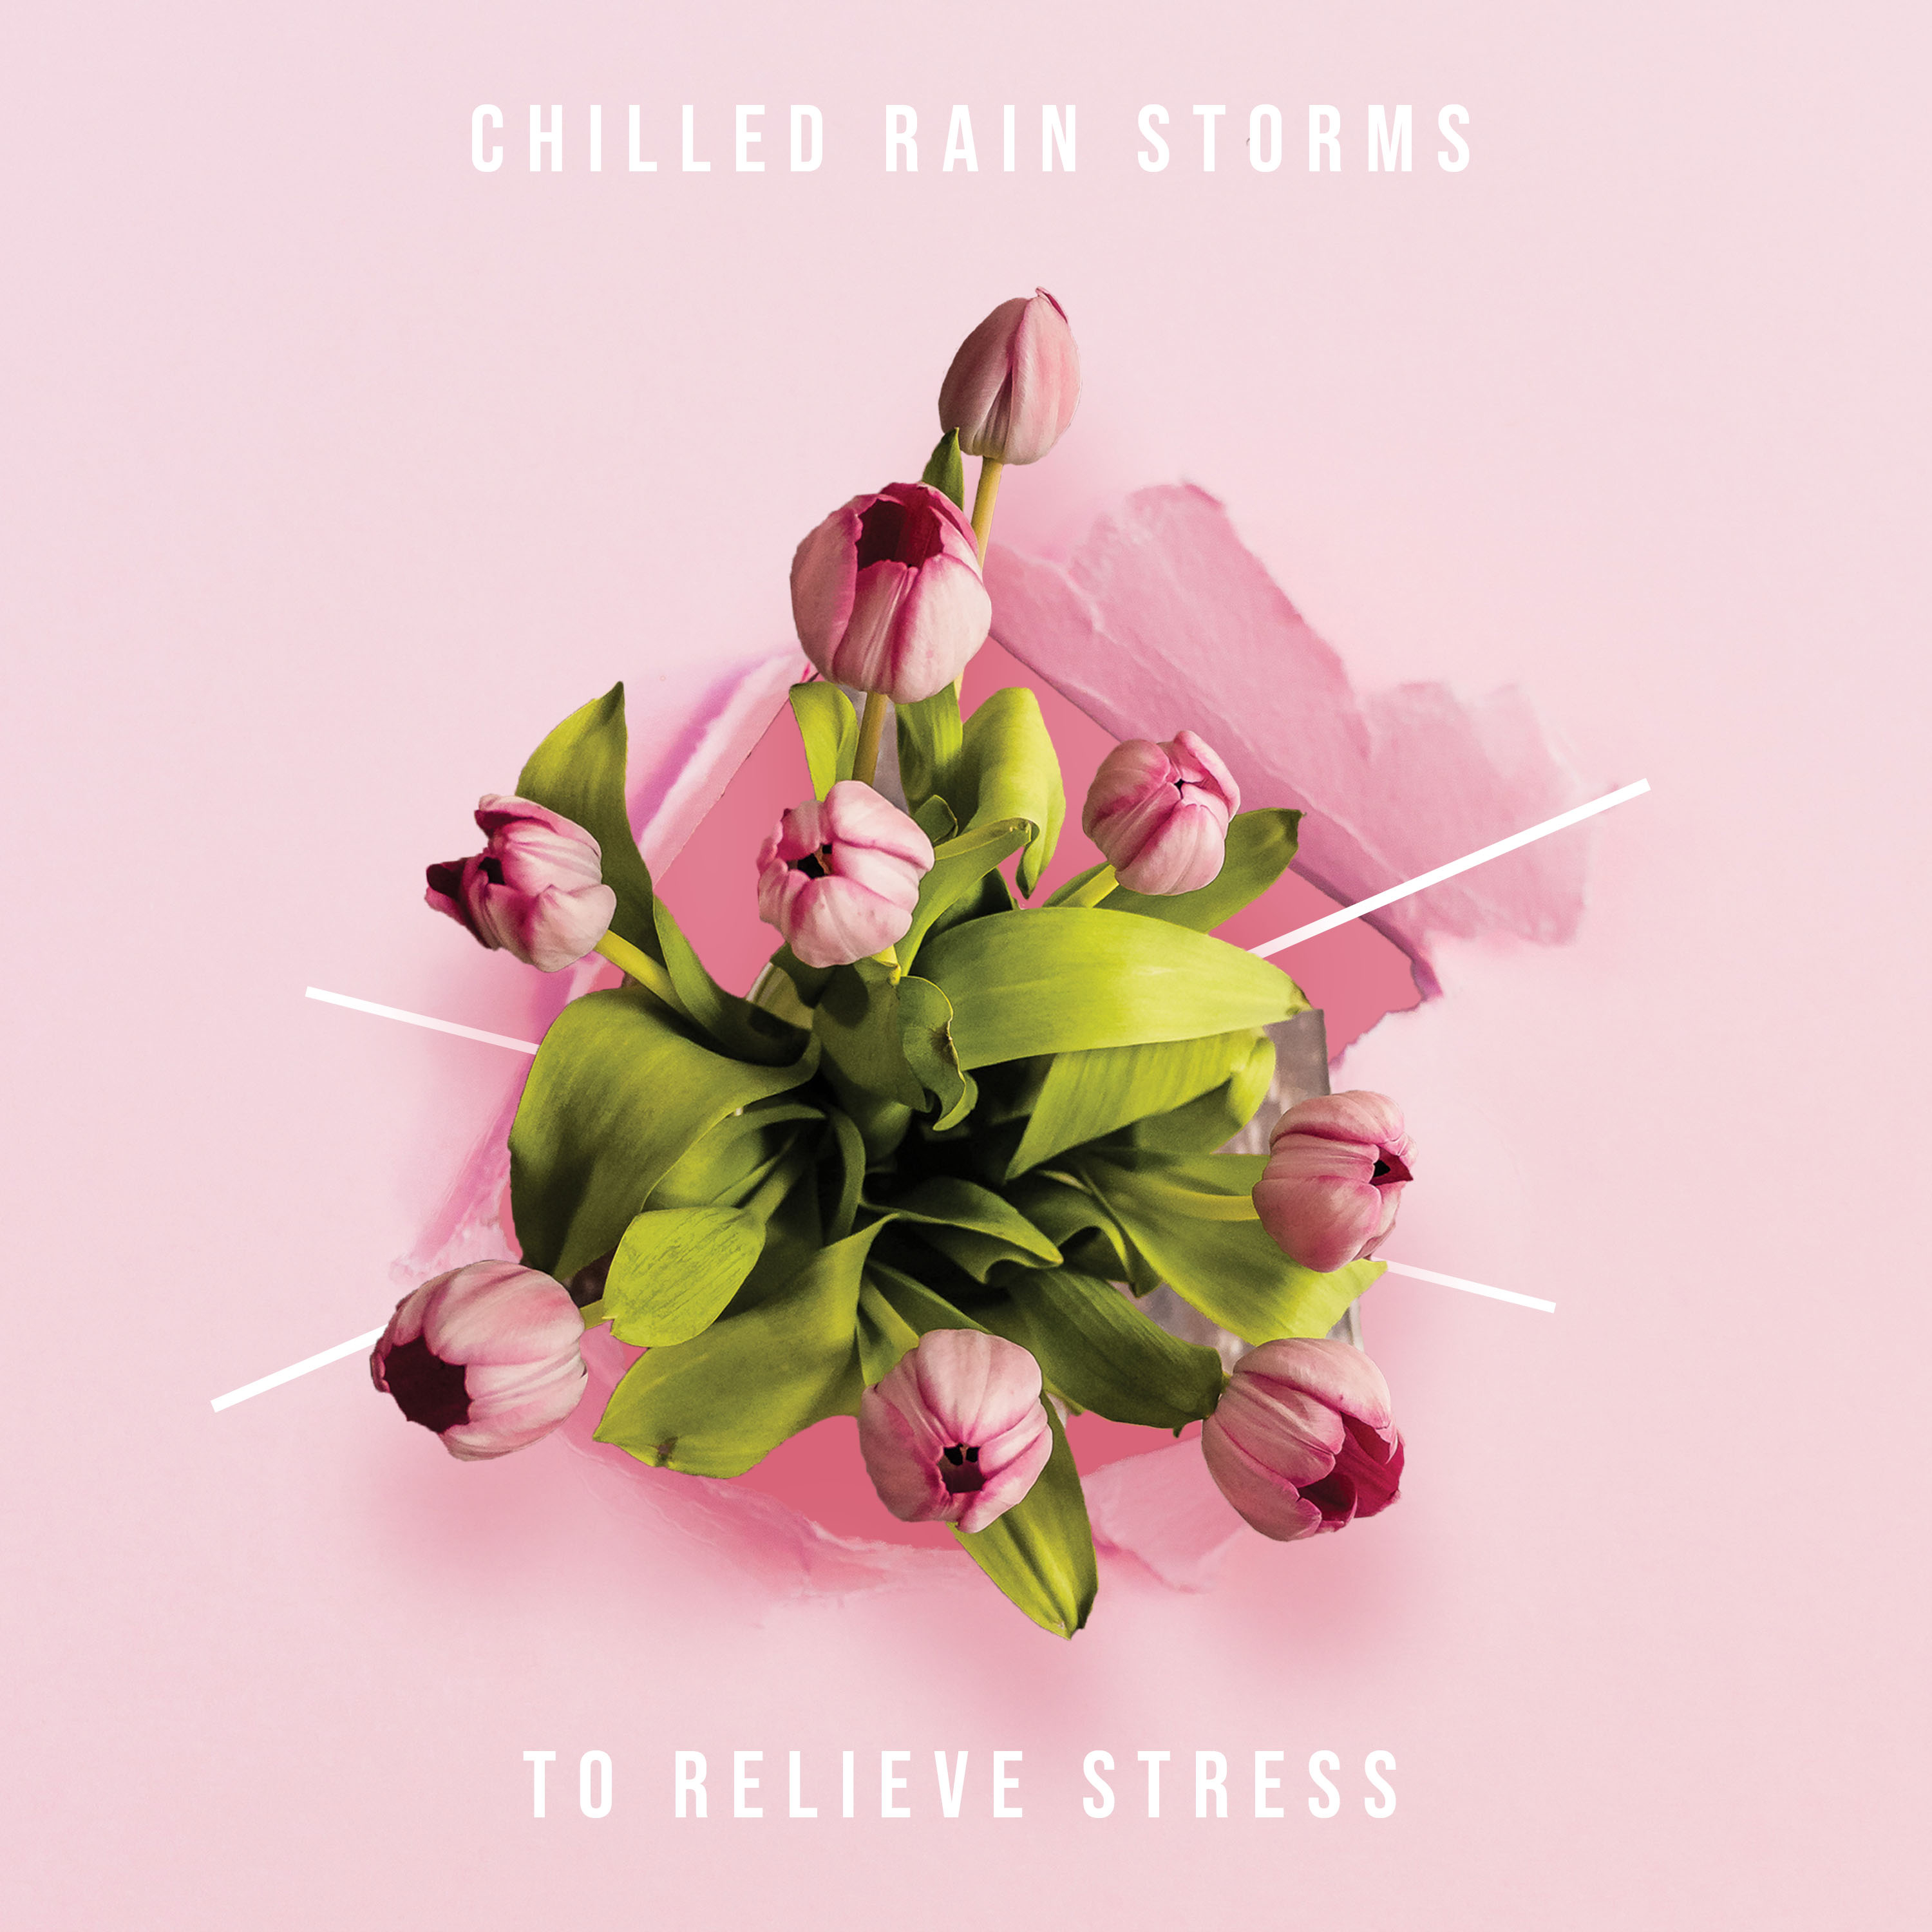 #15 Chilled Rain Storms to Relieve Stress